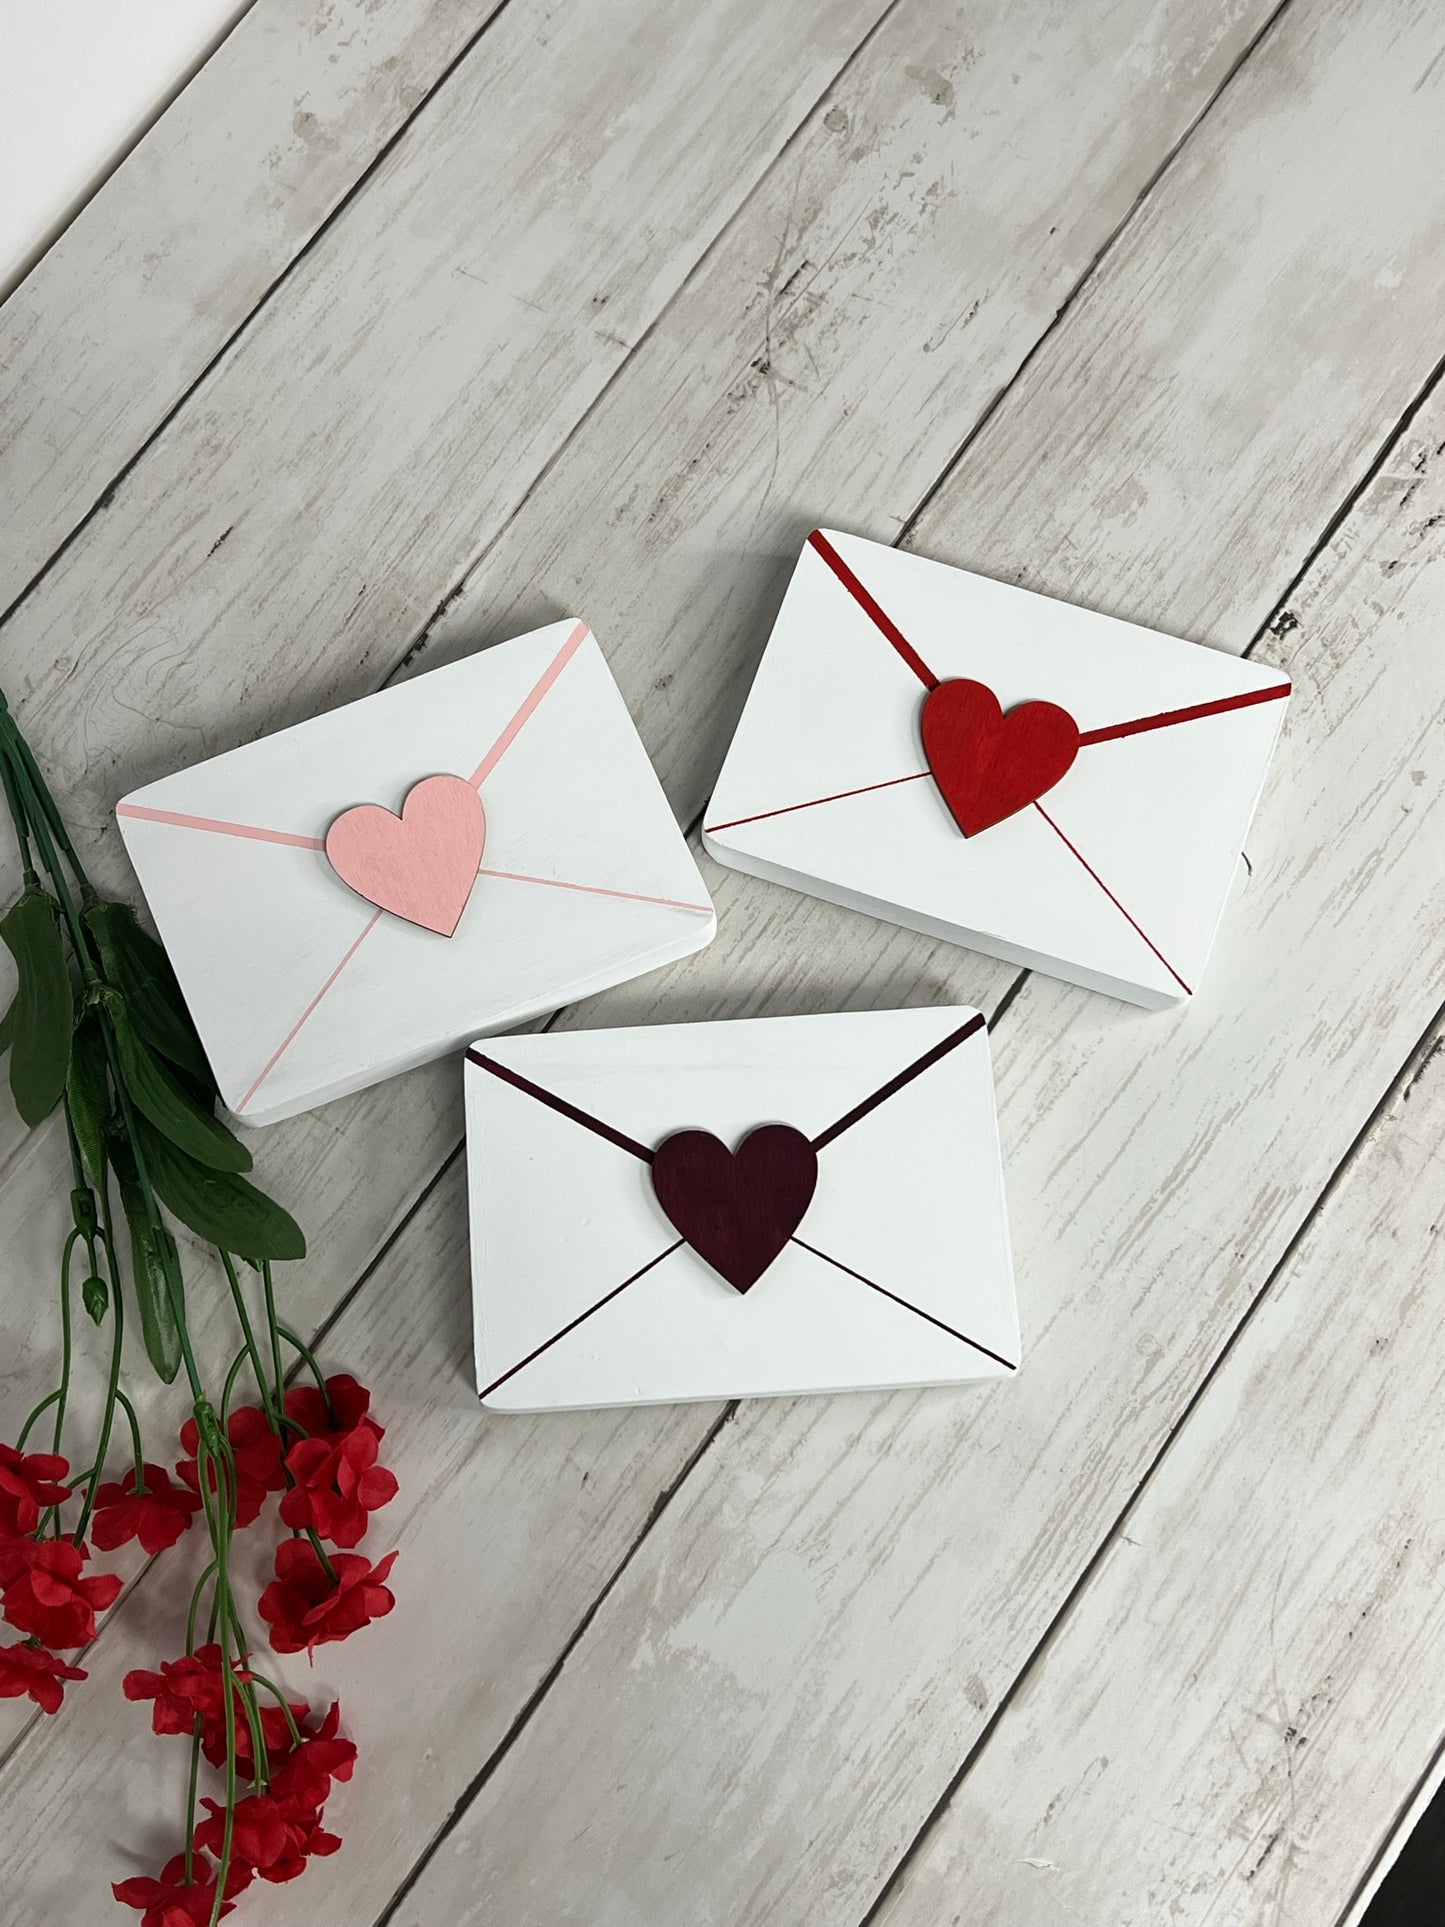 LOVE Letters